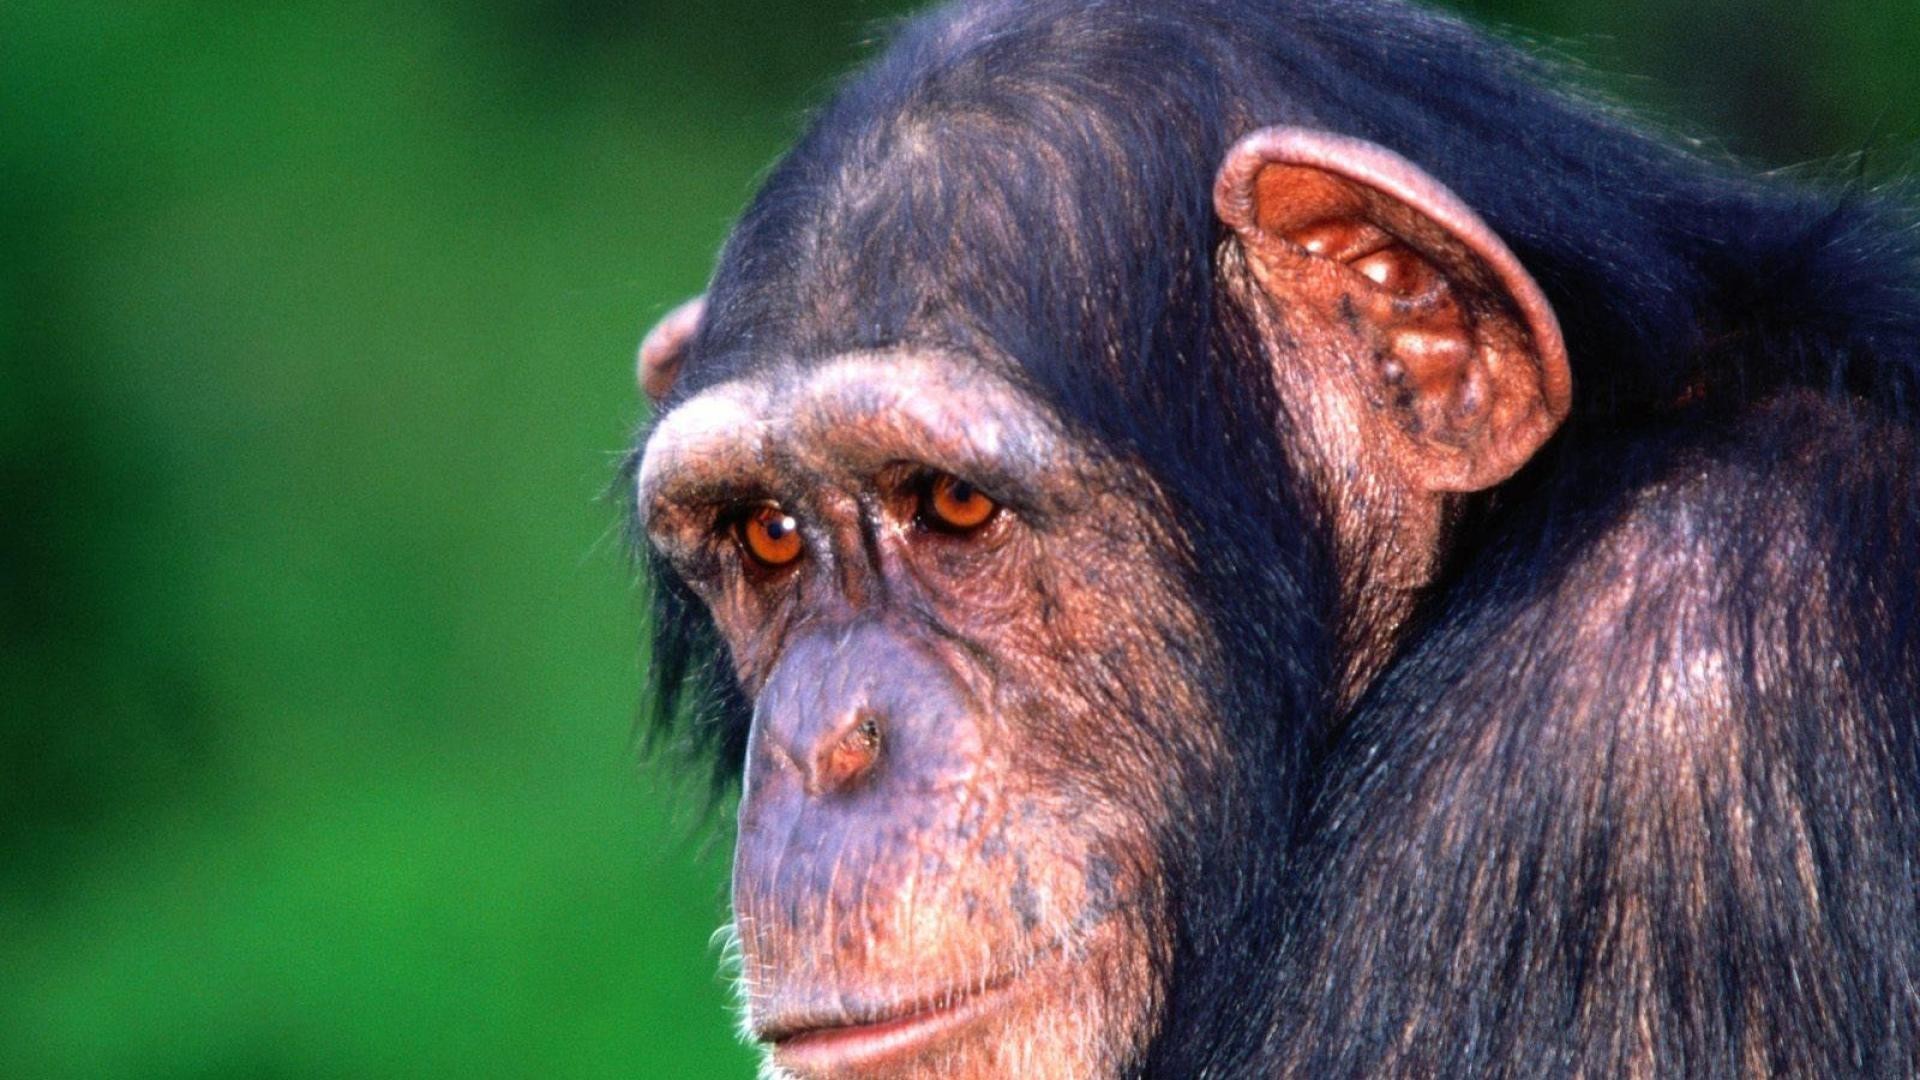 1920x1080 Sad monkey chimpanzee wallpapers and images - wallpapers, pictures, photos